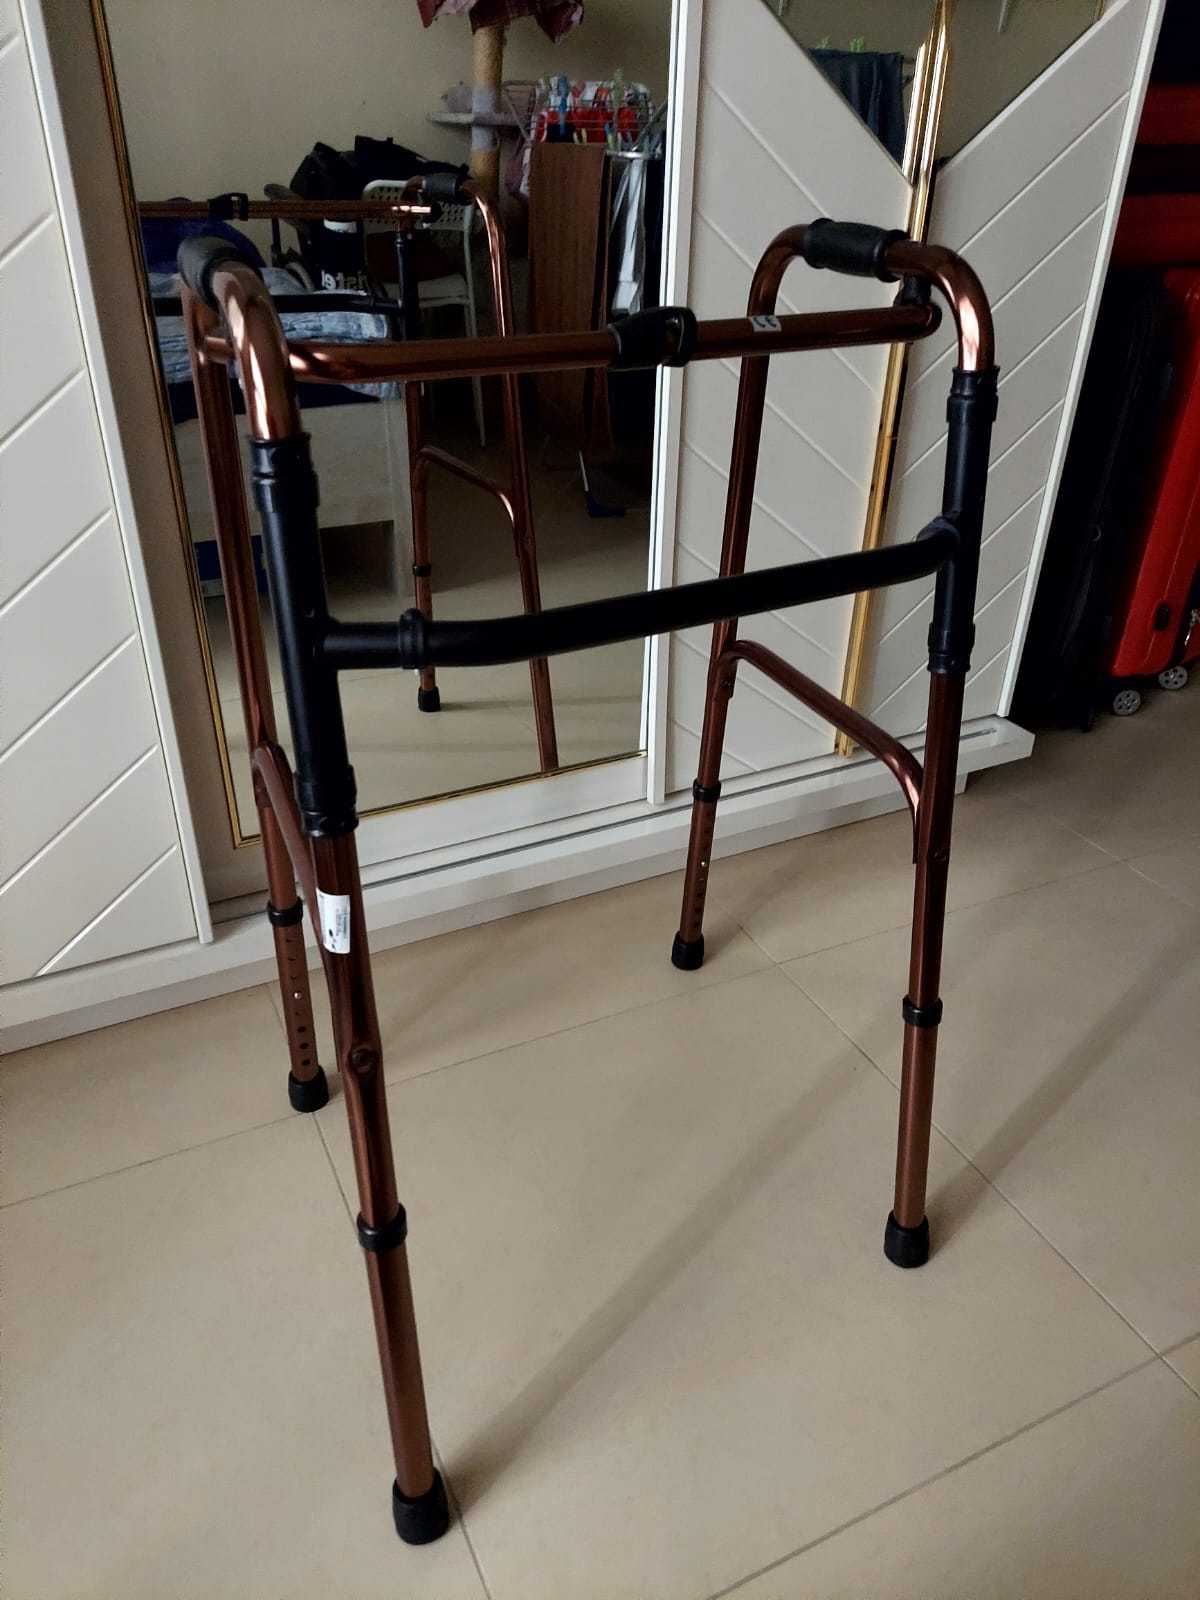 Kaiyang Medical Walker for sale in perfect condition